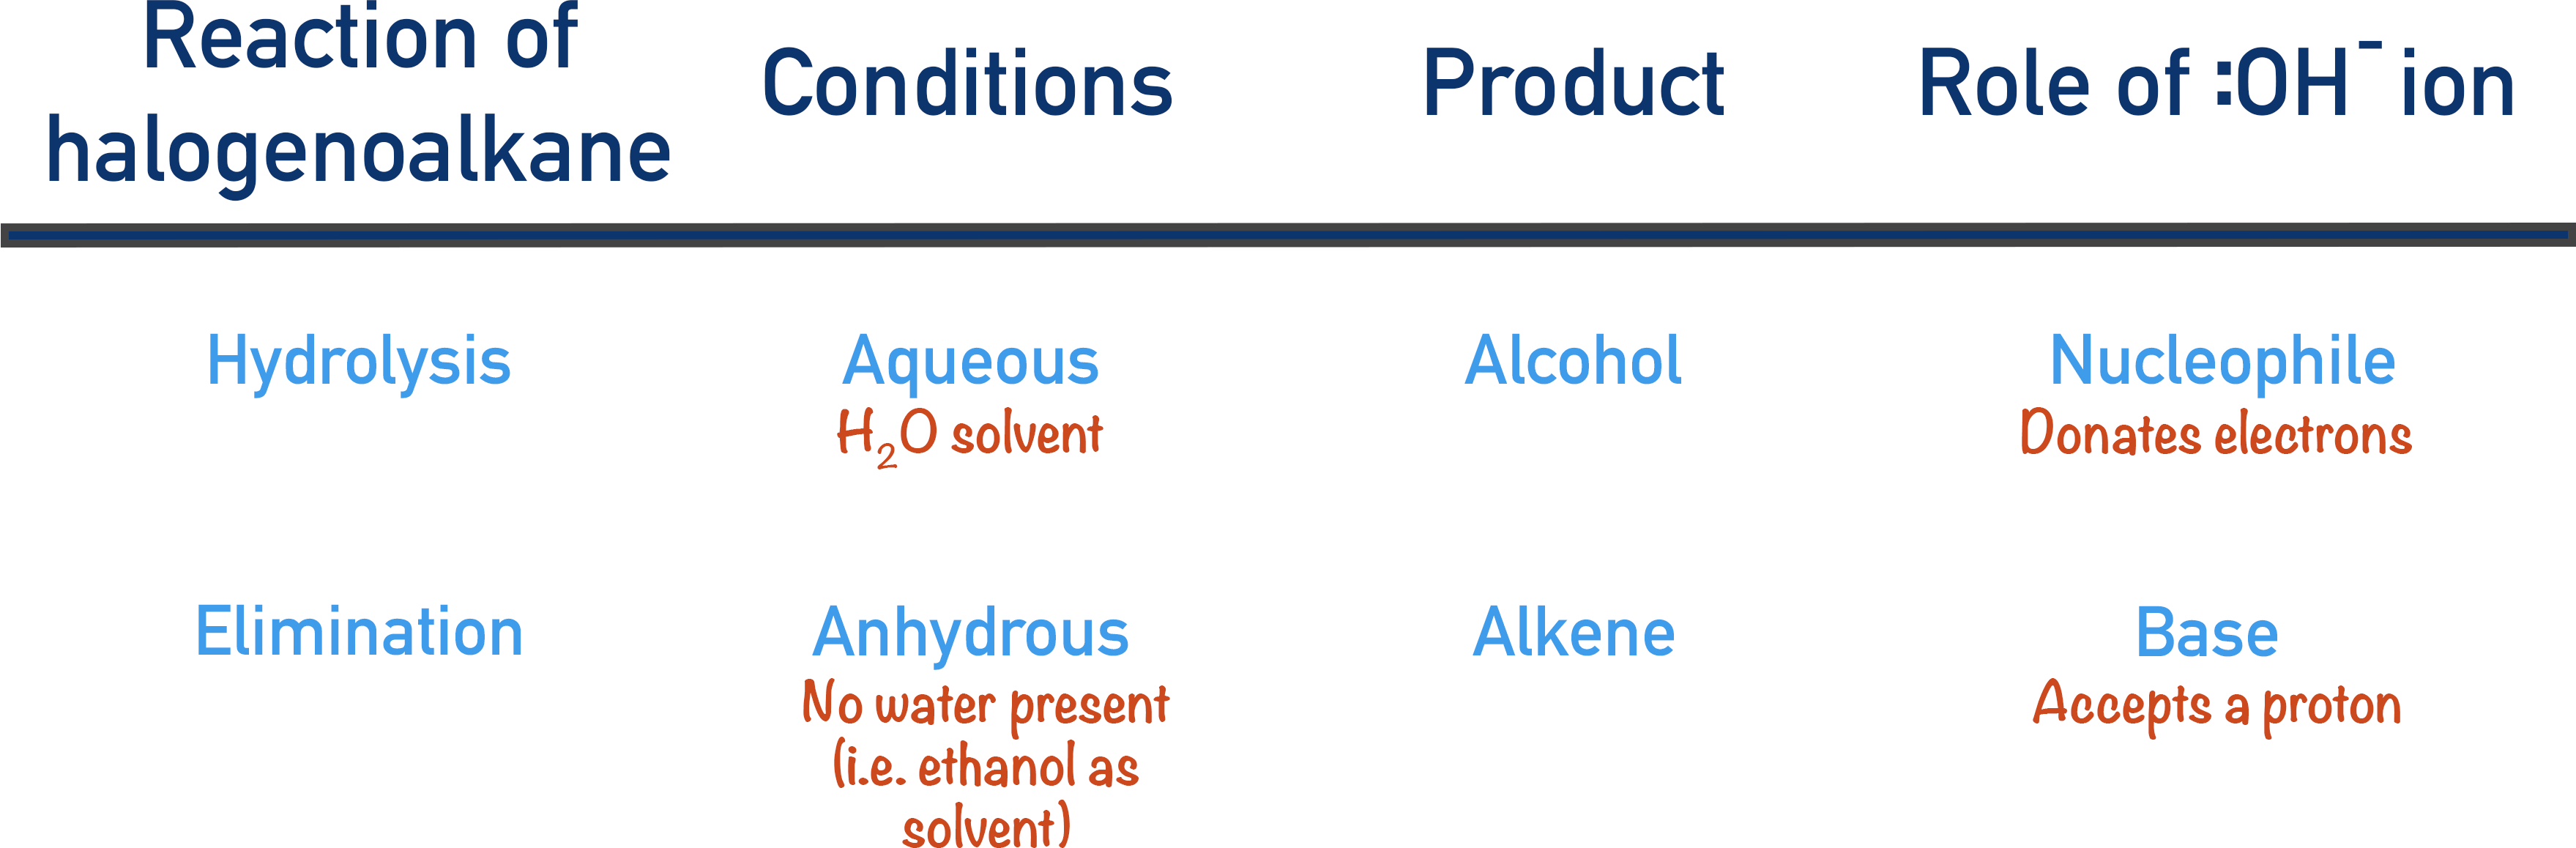 halogenoalkane hydrolysis and elimination reaction conditions reagents